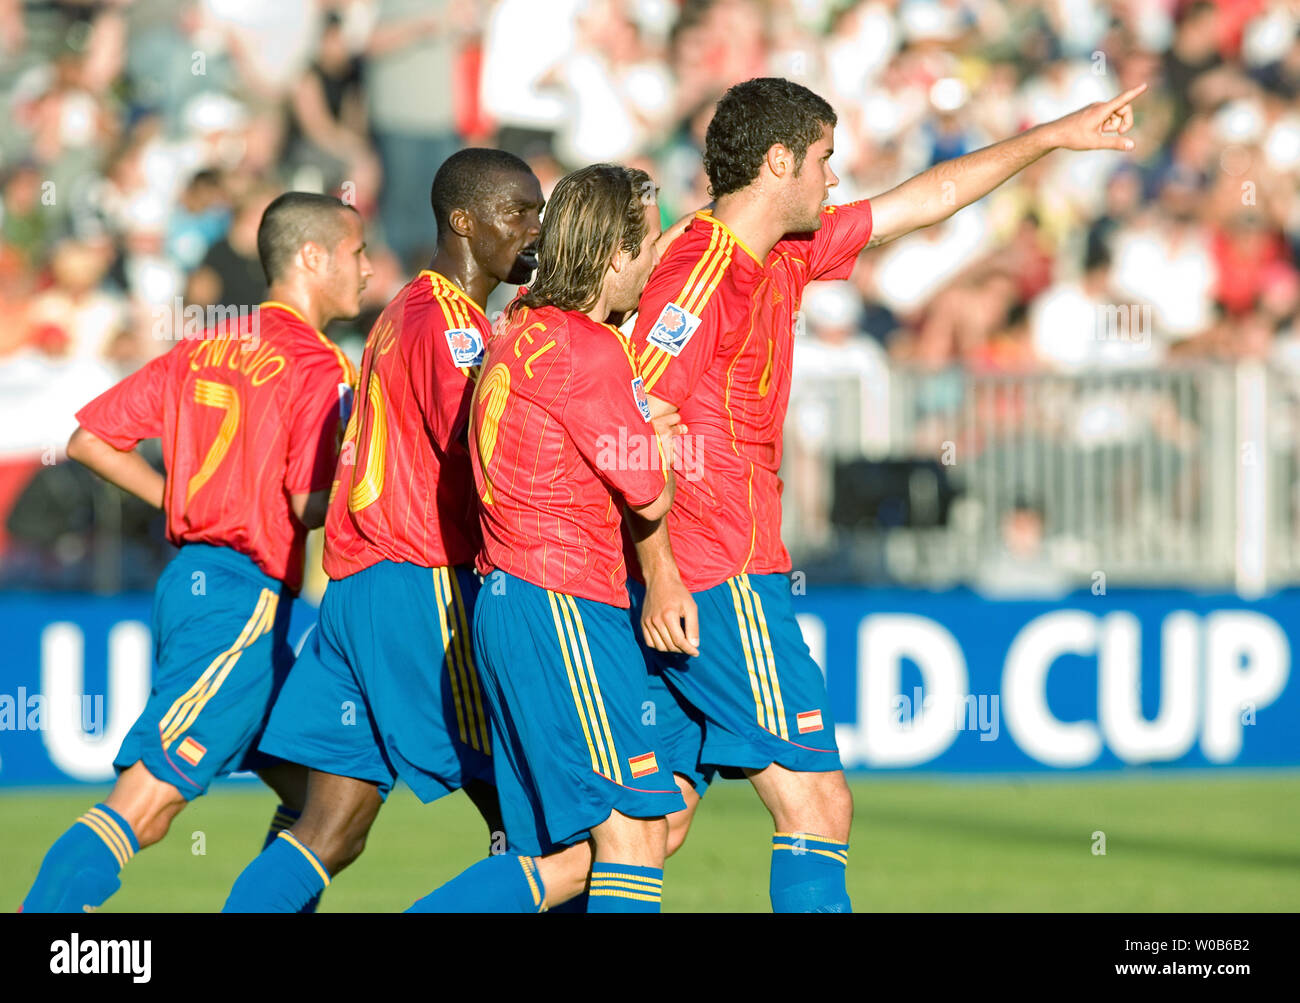 L-R) Spain's Toni Calvo, Sunny Stephen and Diego Capel celebrate teammate  Mario Suarez's first goal of the game against Zambia during the first half  of a 2007 FIFA U-20 World Cup soccer